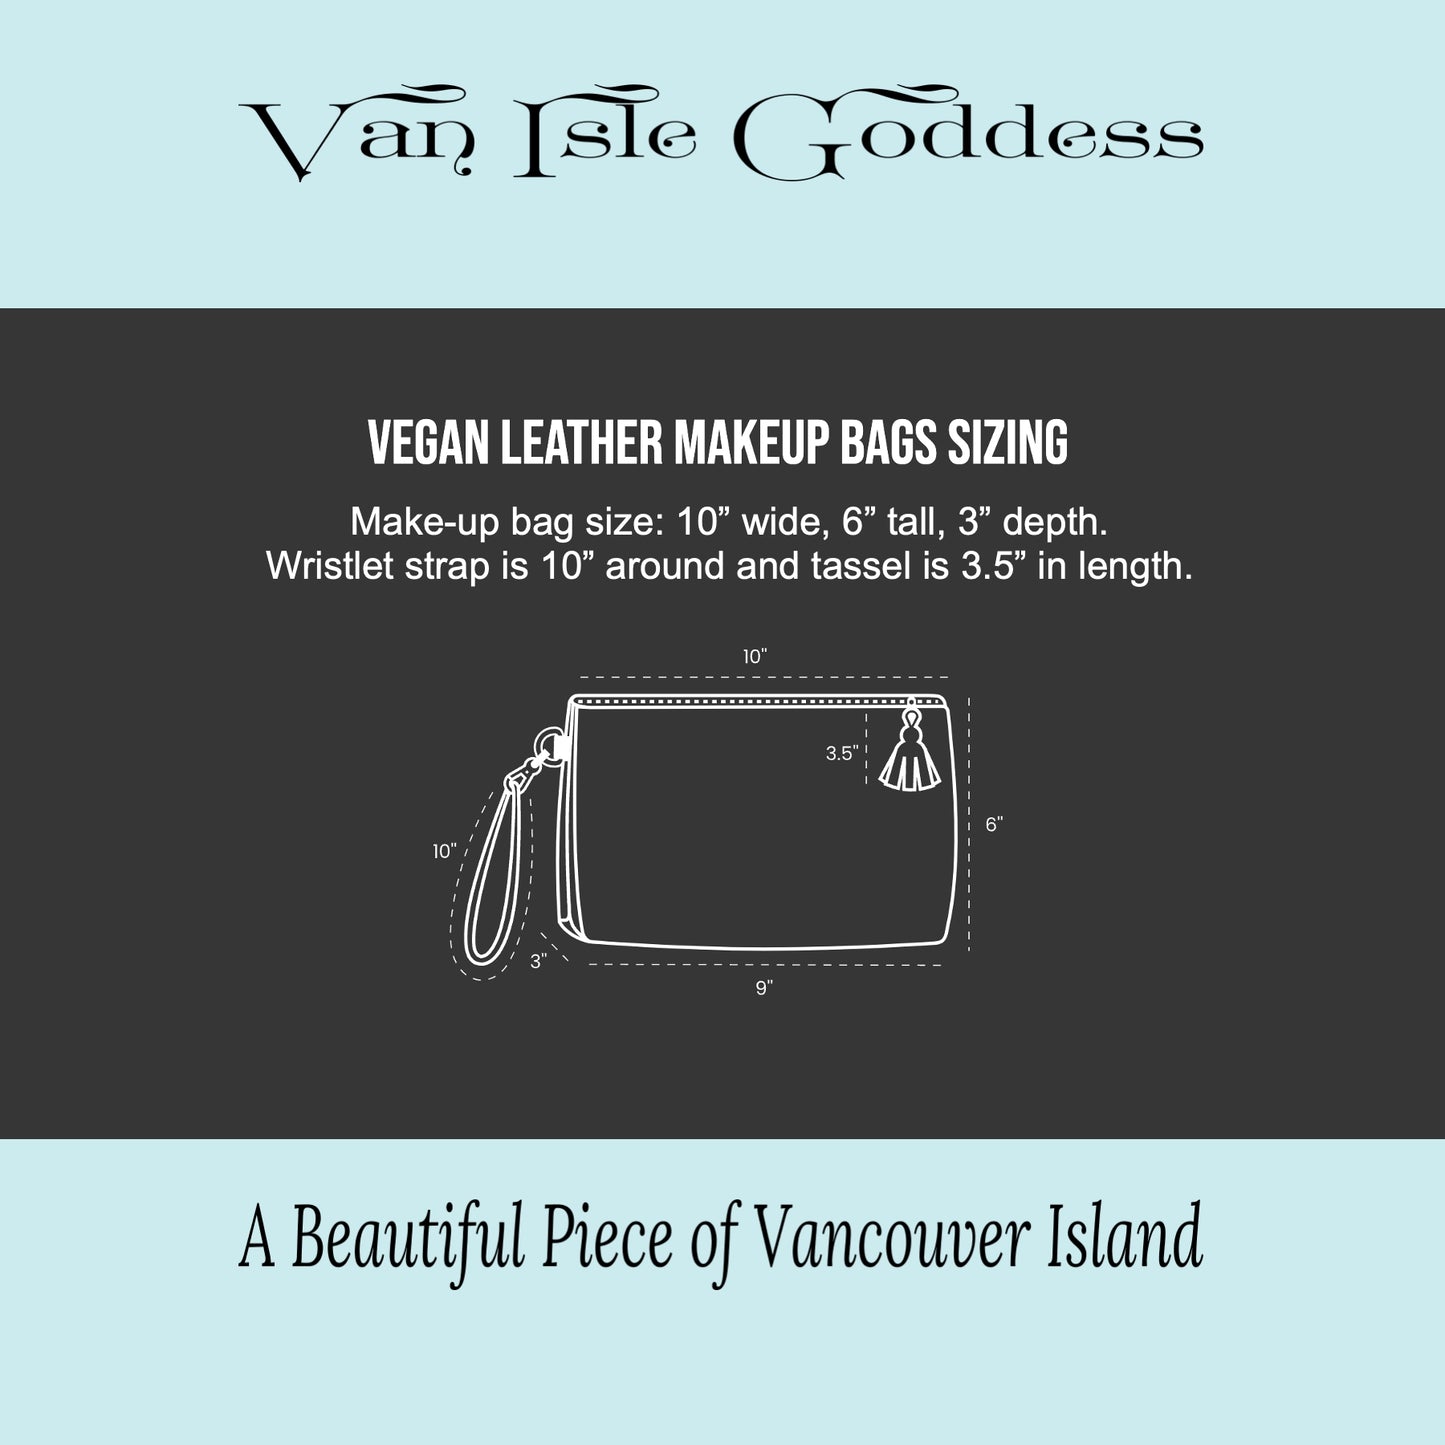 Standing in the Glow Sand Dollar Vegan Leather Makeup Bag